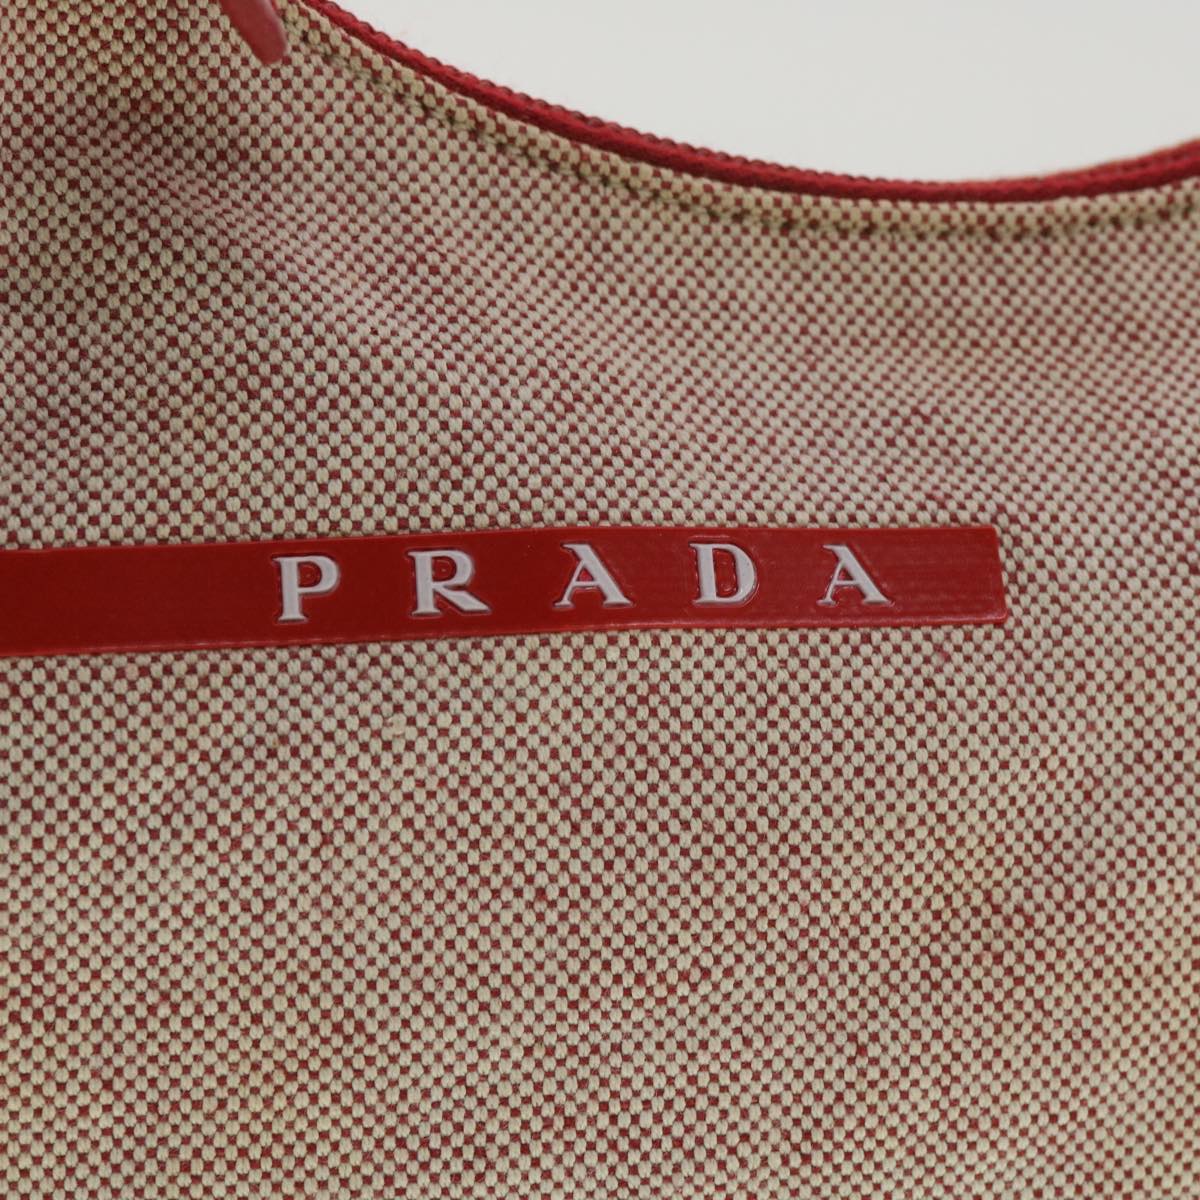 PRADA Accessory Pouch Canvas Red Gray Auth bs4097